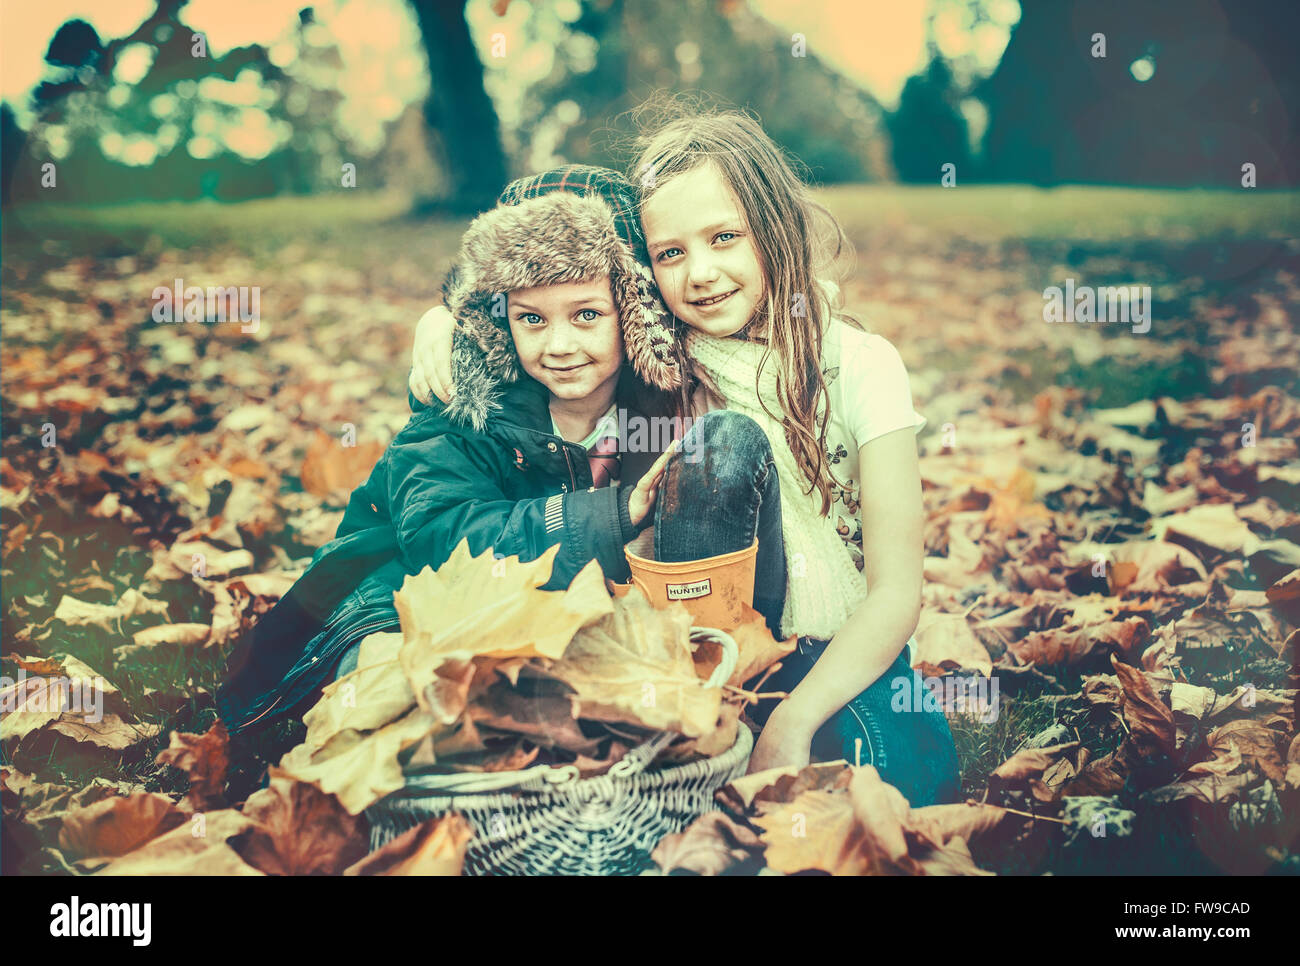 two kids in autumn leaves Stock Photo